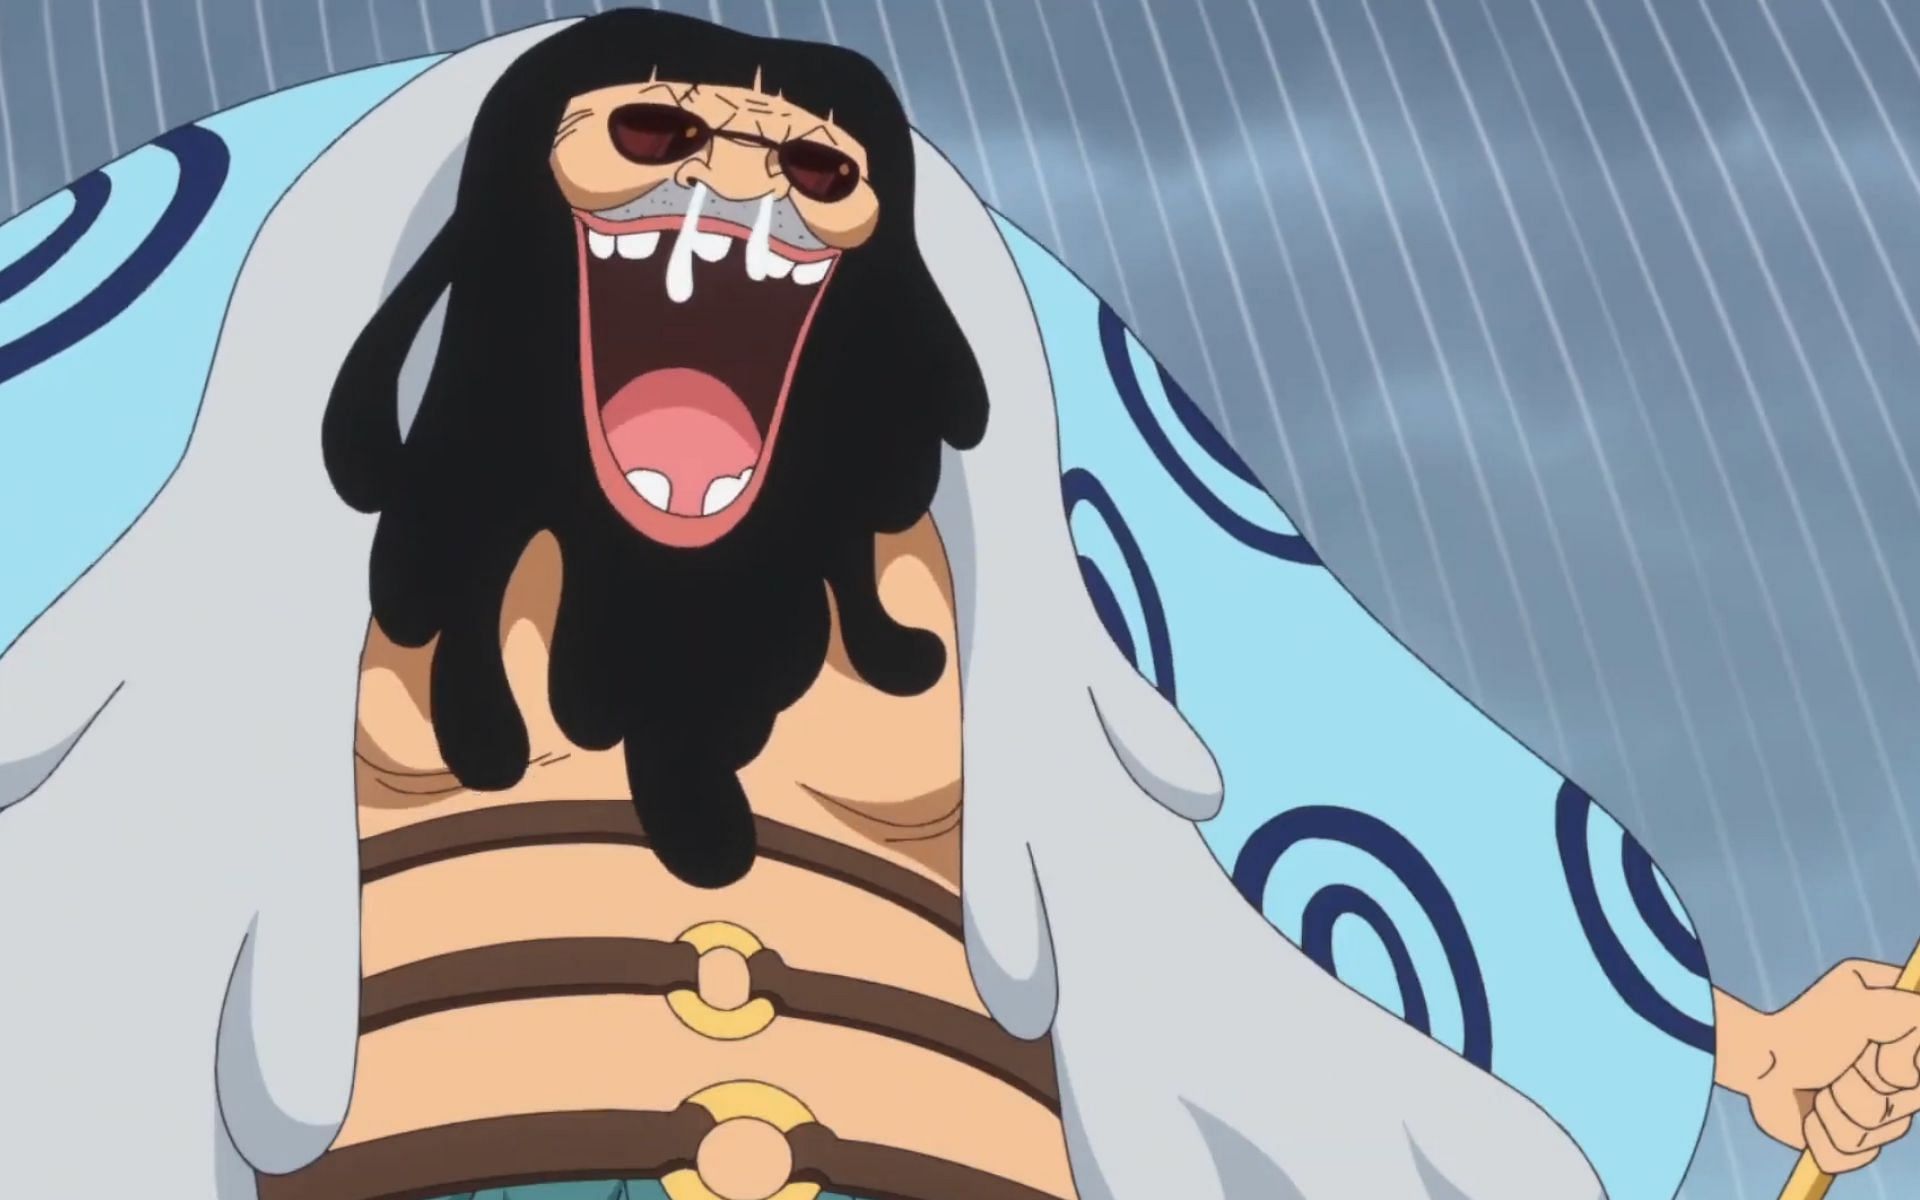 Trebol is widely considered to be one of the least appealing characters in One Piece (Image Credits: Eiichiro Oda/Shueisha, Viz Media, One Piece)